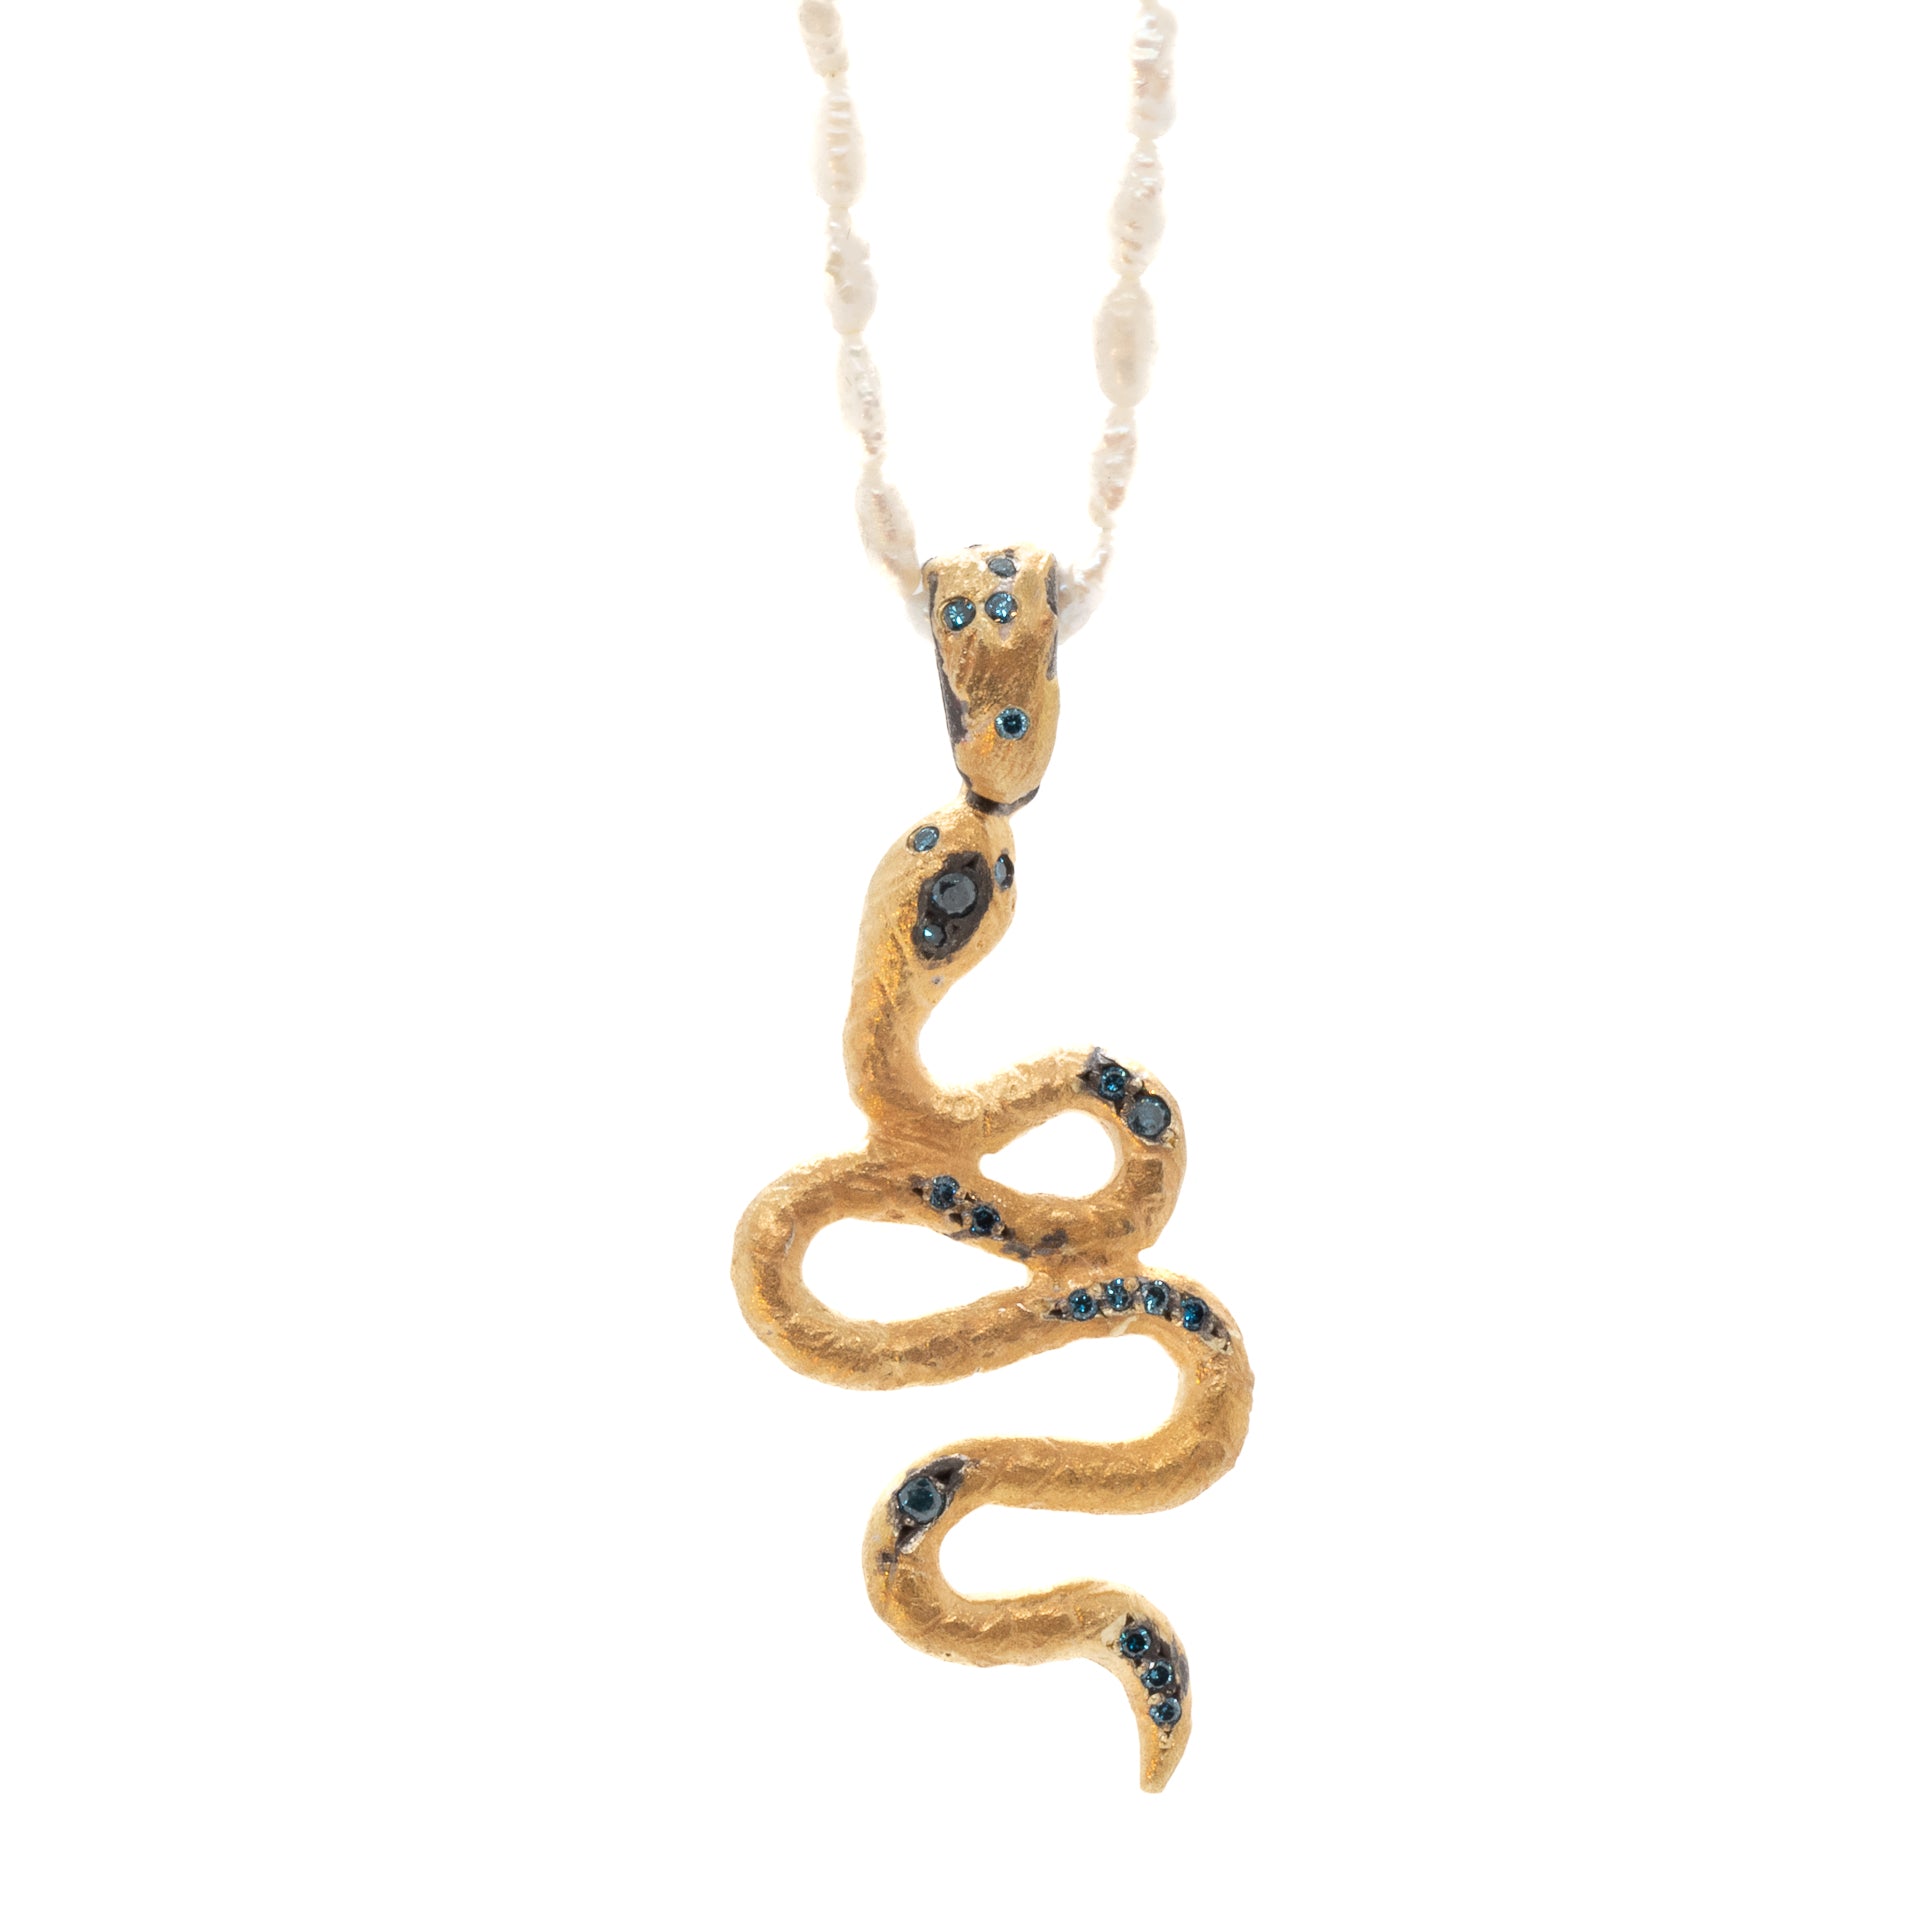 Stylish shot of the Nature Snake Necklace, showcasing the snake pendant and the Mother of Pearl Gemstone chain, creating a statement piece that enhances any outfit.